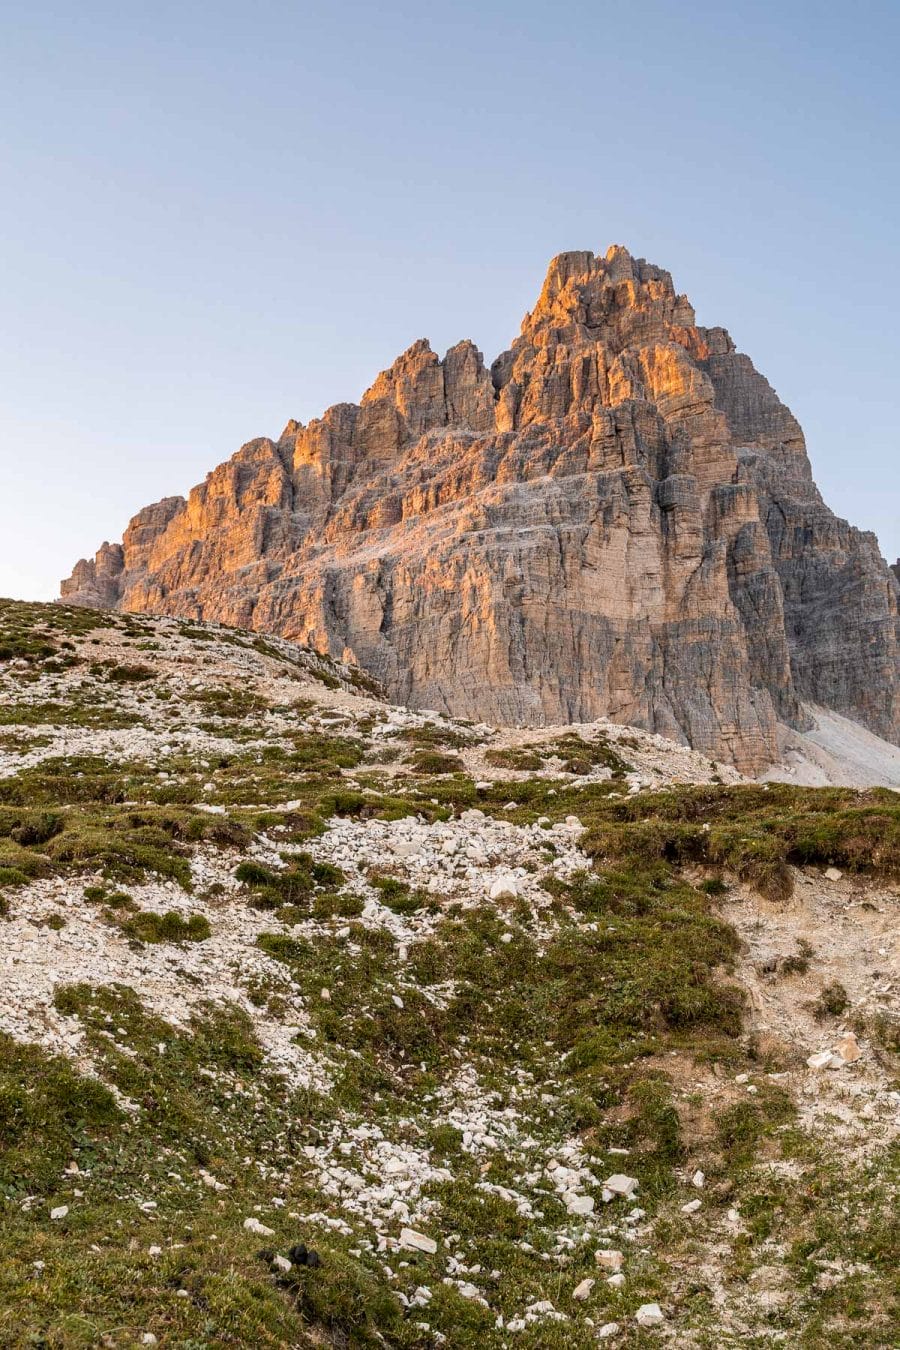 Sunset at Tre Cime di Lavaredo, which is a must visit on every Dolomites road trip itinerary